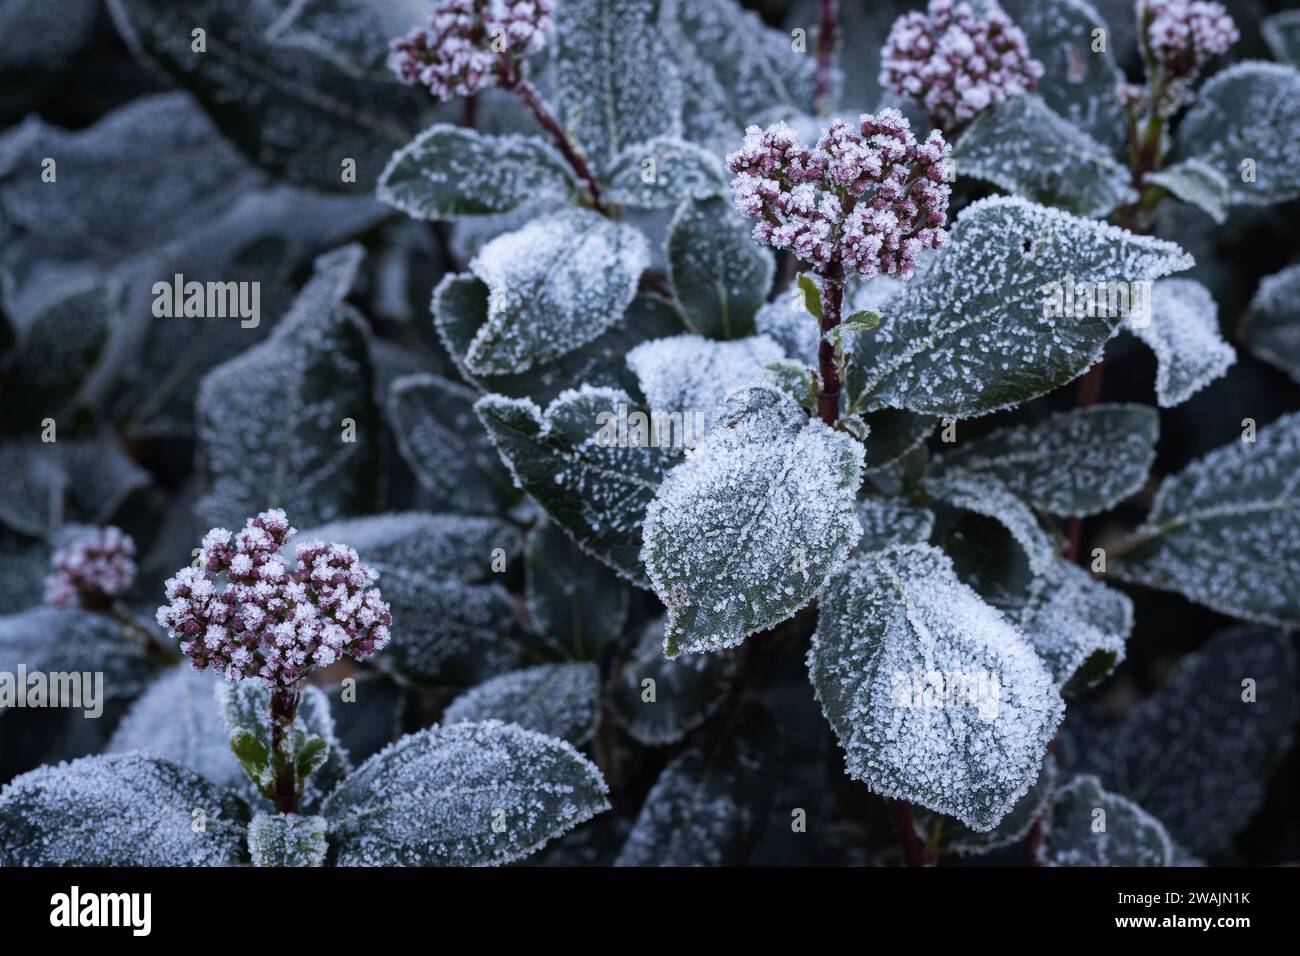 Seasonal winter foliage background. Frost and ice crystals formed on the flowers and leaves of a Viburnum plant. Copy space to the left. Stock Photo